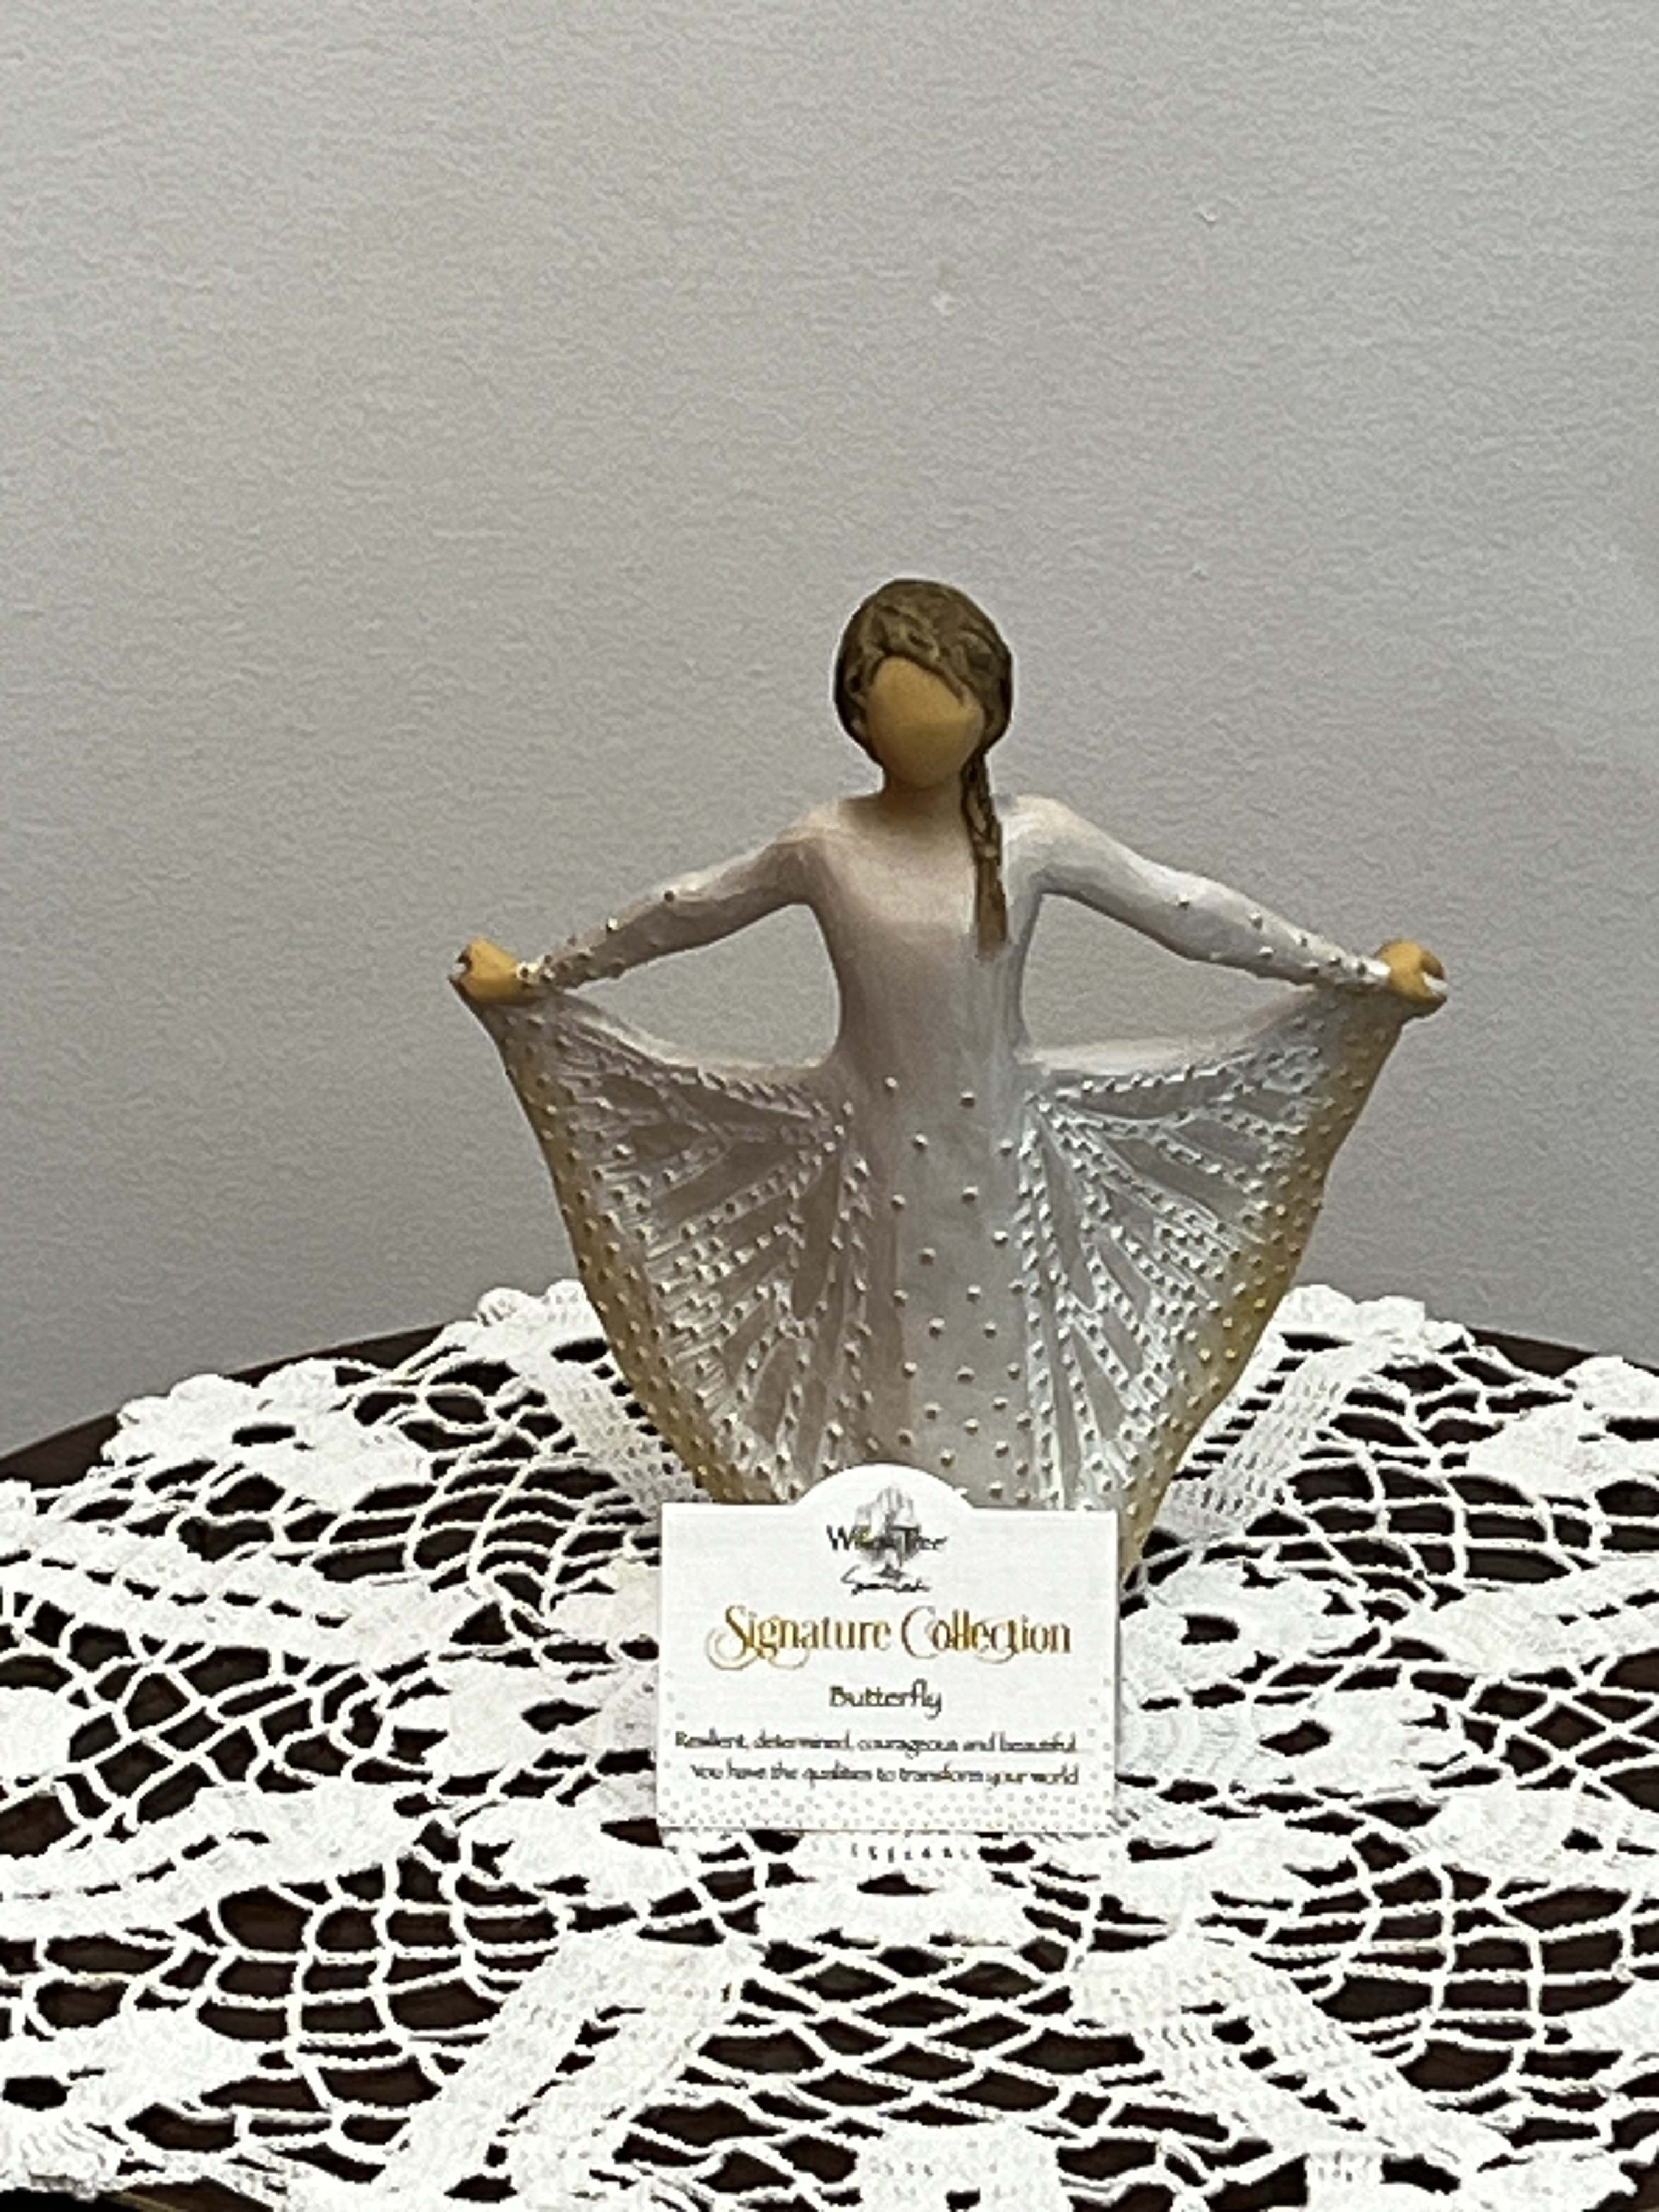 WillowTree Figurine - “Butterfly” - The “Butterfly” WillowTree figurine from the Signature Collection. “Resilient, determined, courageous and beautiful. You have the qualities to transform your world.”